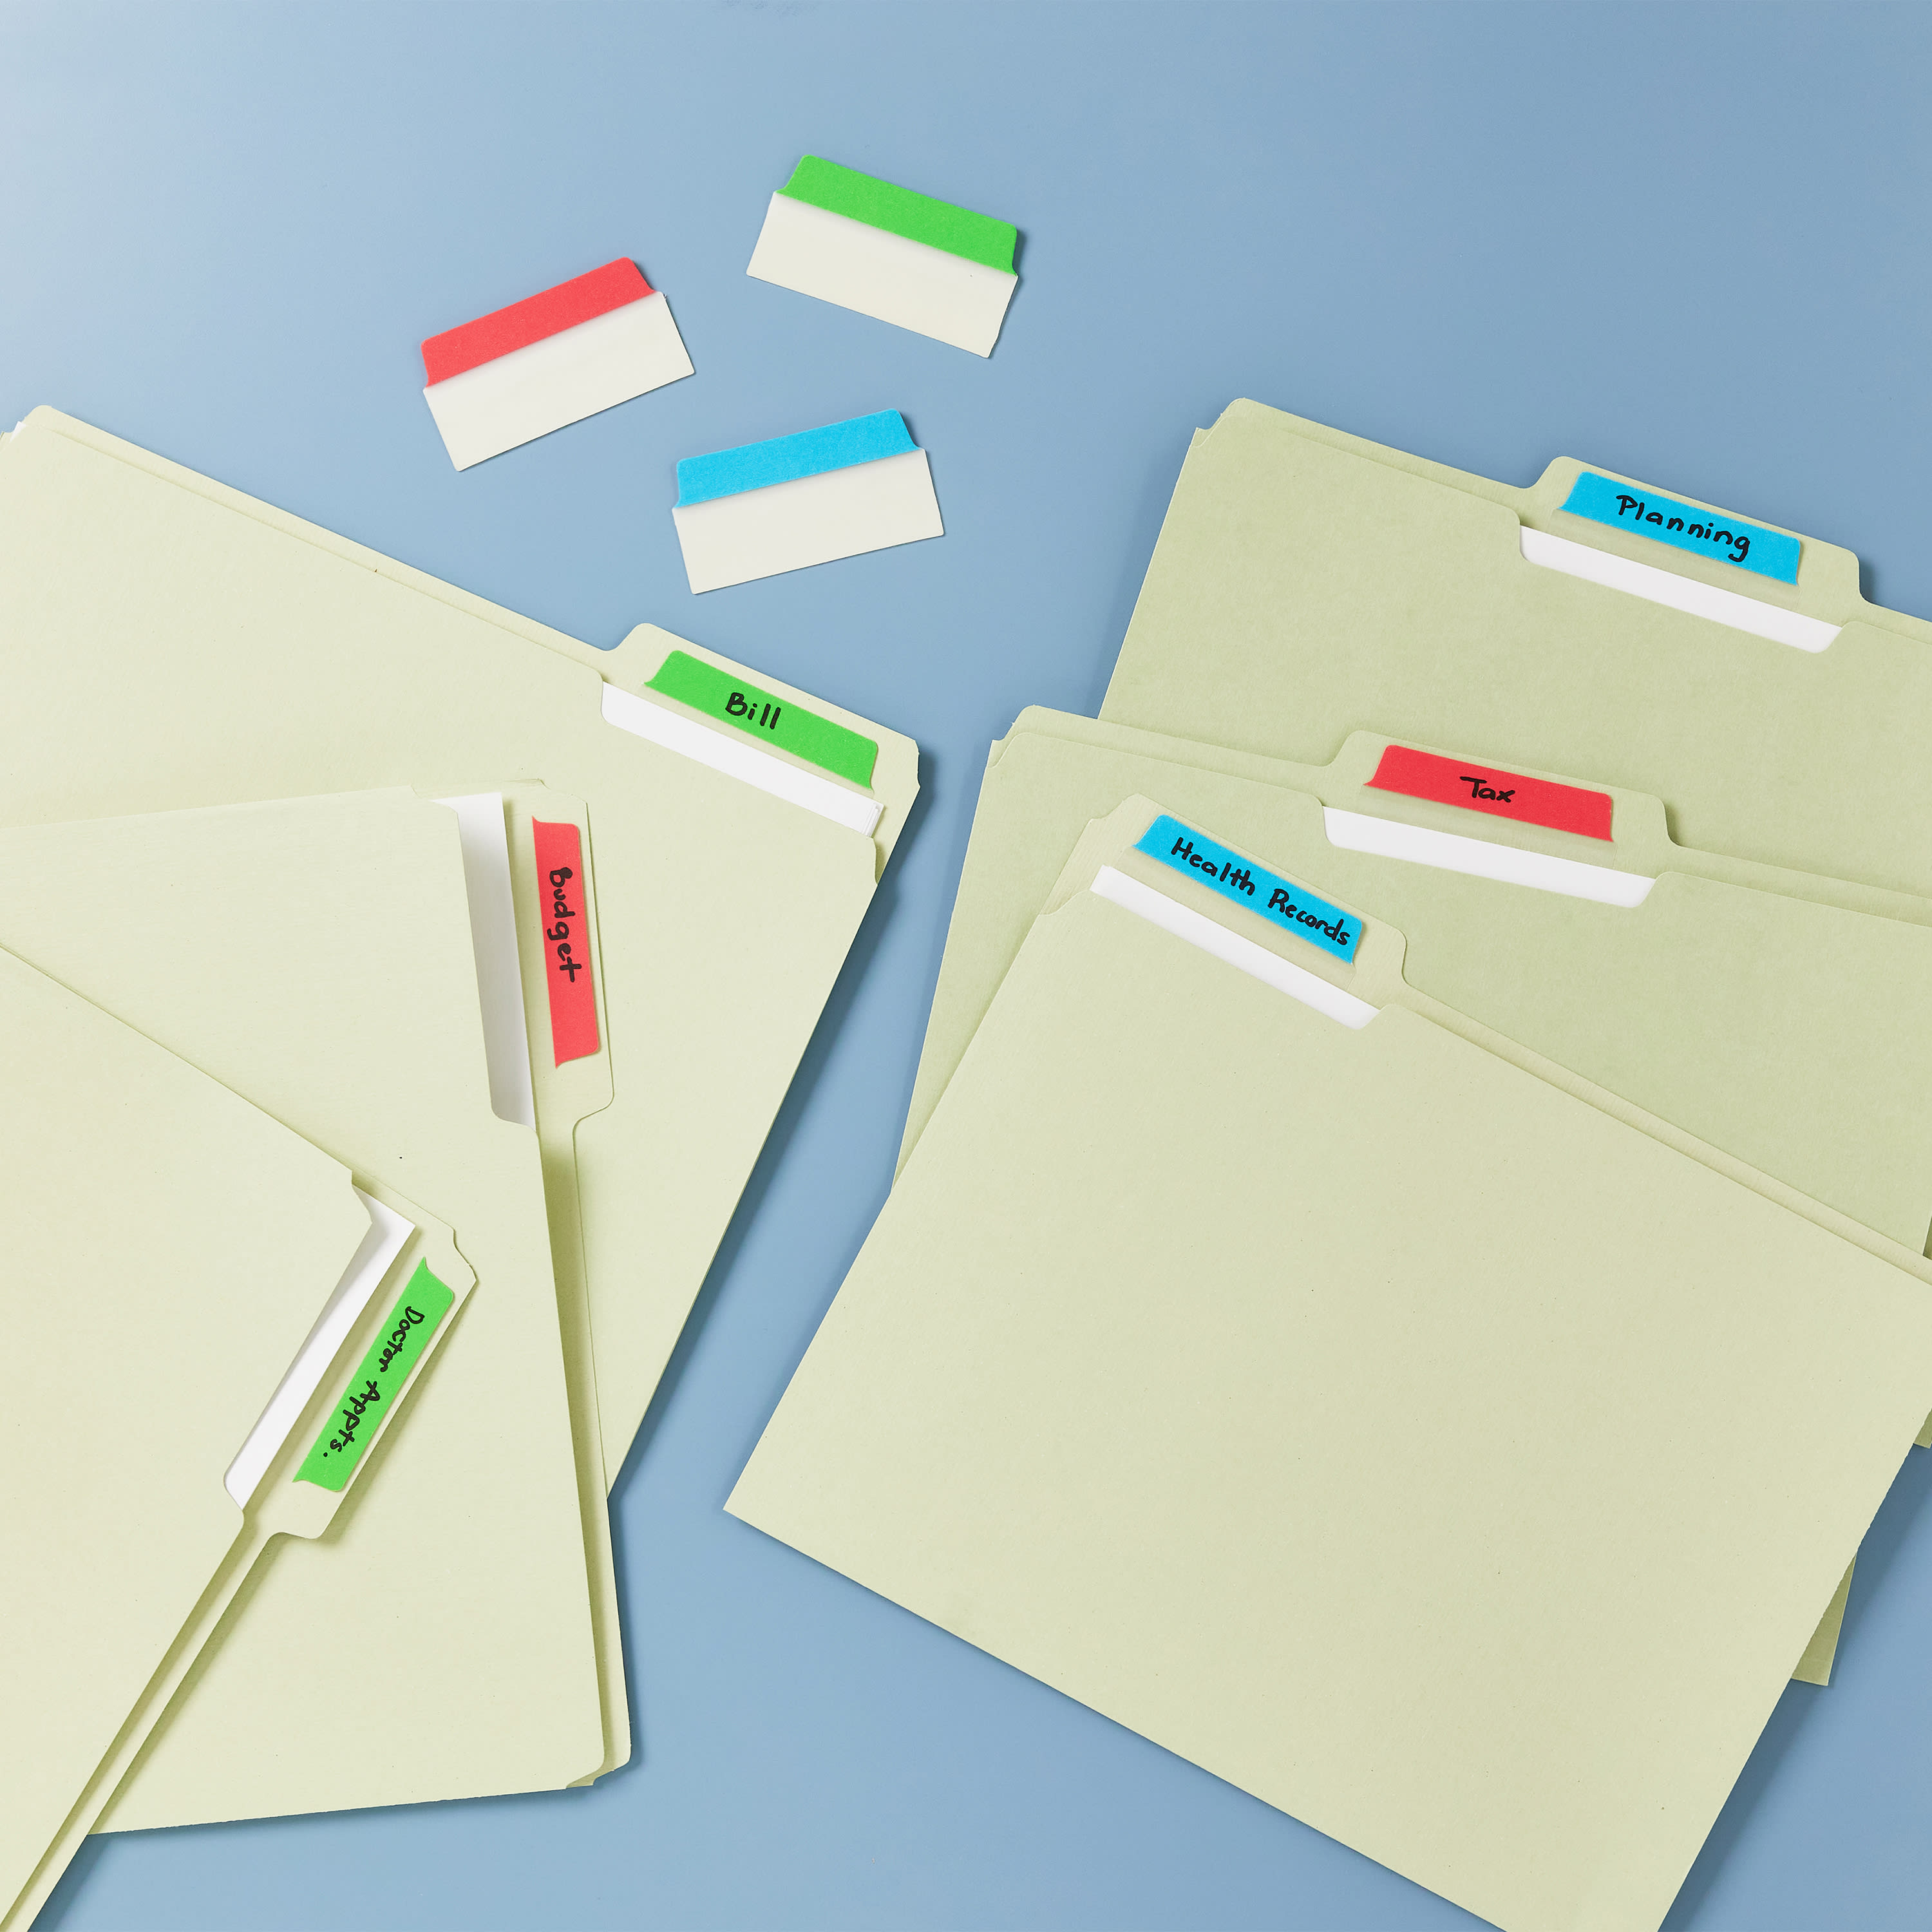 Loose file folders are fanned out on a desk. Avery UltraTabs 74775 are are used to label the file folders instead of labels. Things like, "Health Records," "Budget," "Doctor Appts." etc. are hand written on the UltraTabs.